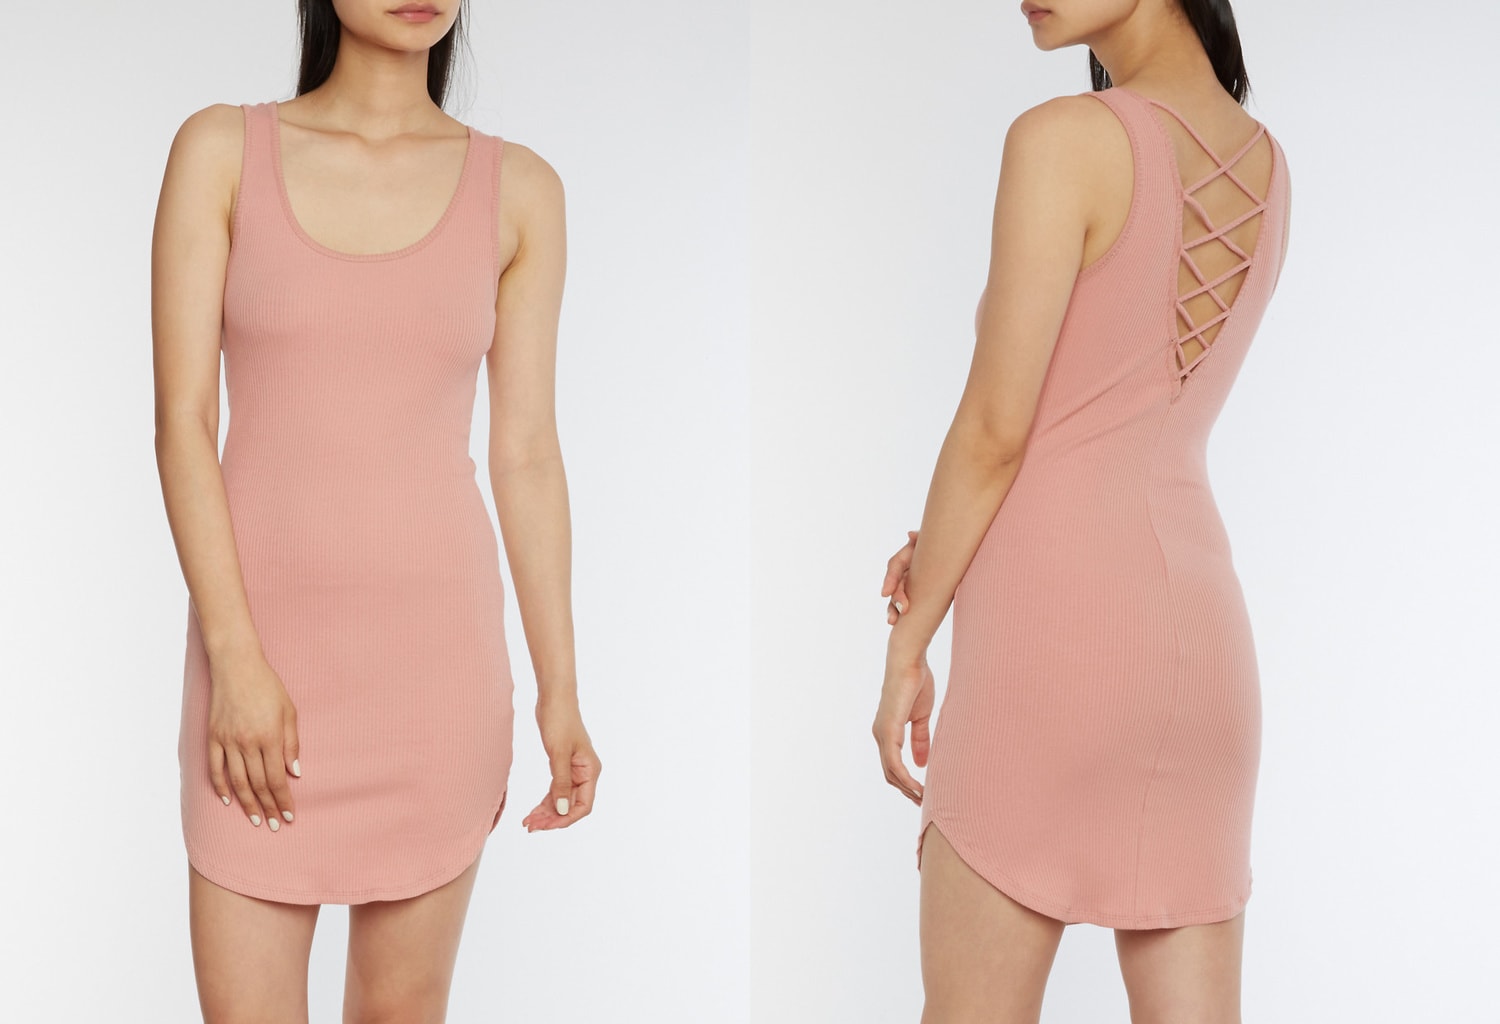 Rainbow Stores millennial pink body con dress with cris cross back detail - just !